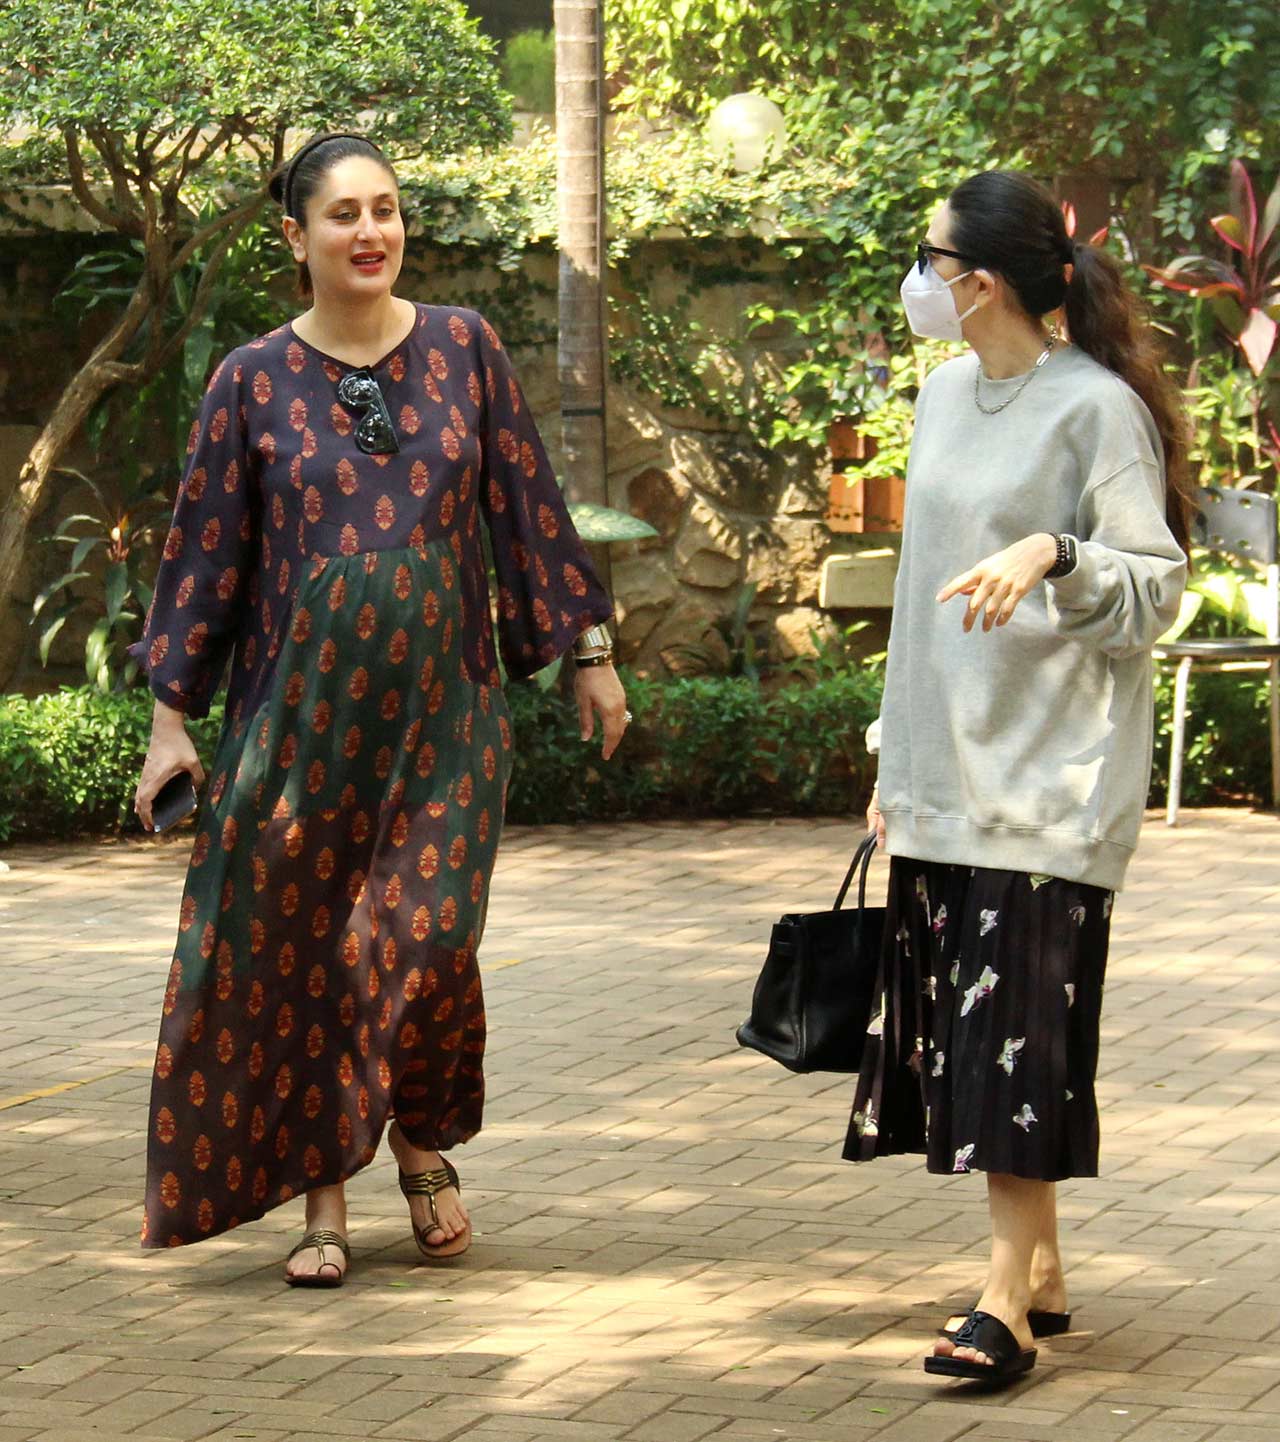 Kareena Kapoor Khan and Karisma Kapoor were also snapped at their casual best in Bandra, Mumbai. The actress, on the work front, will be next seen in Laal Singh Chaddha, opposite Varun Dhawan.